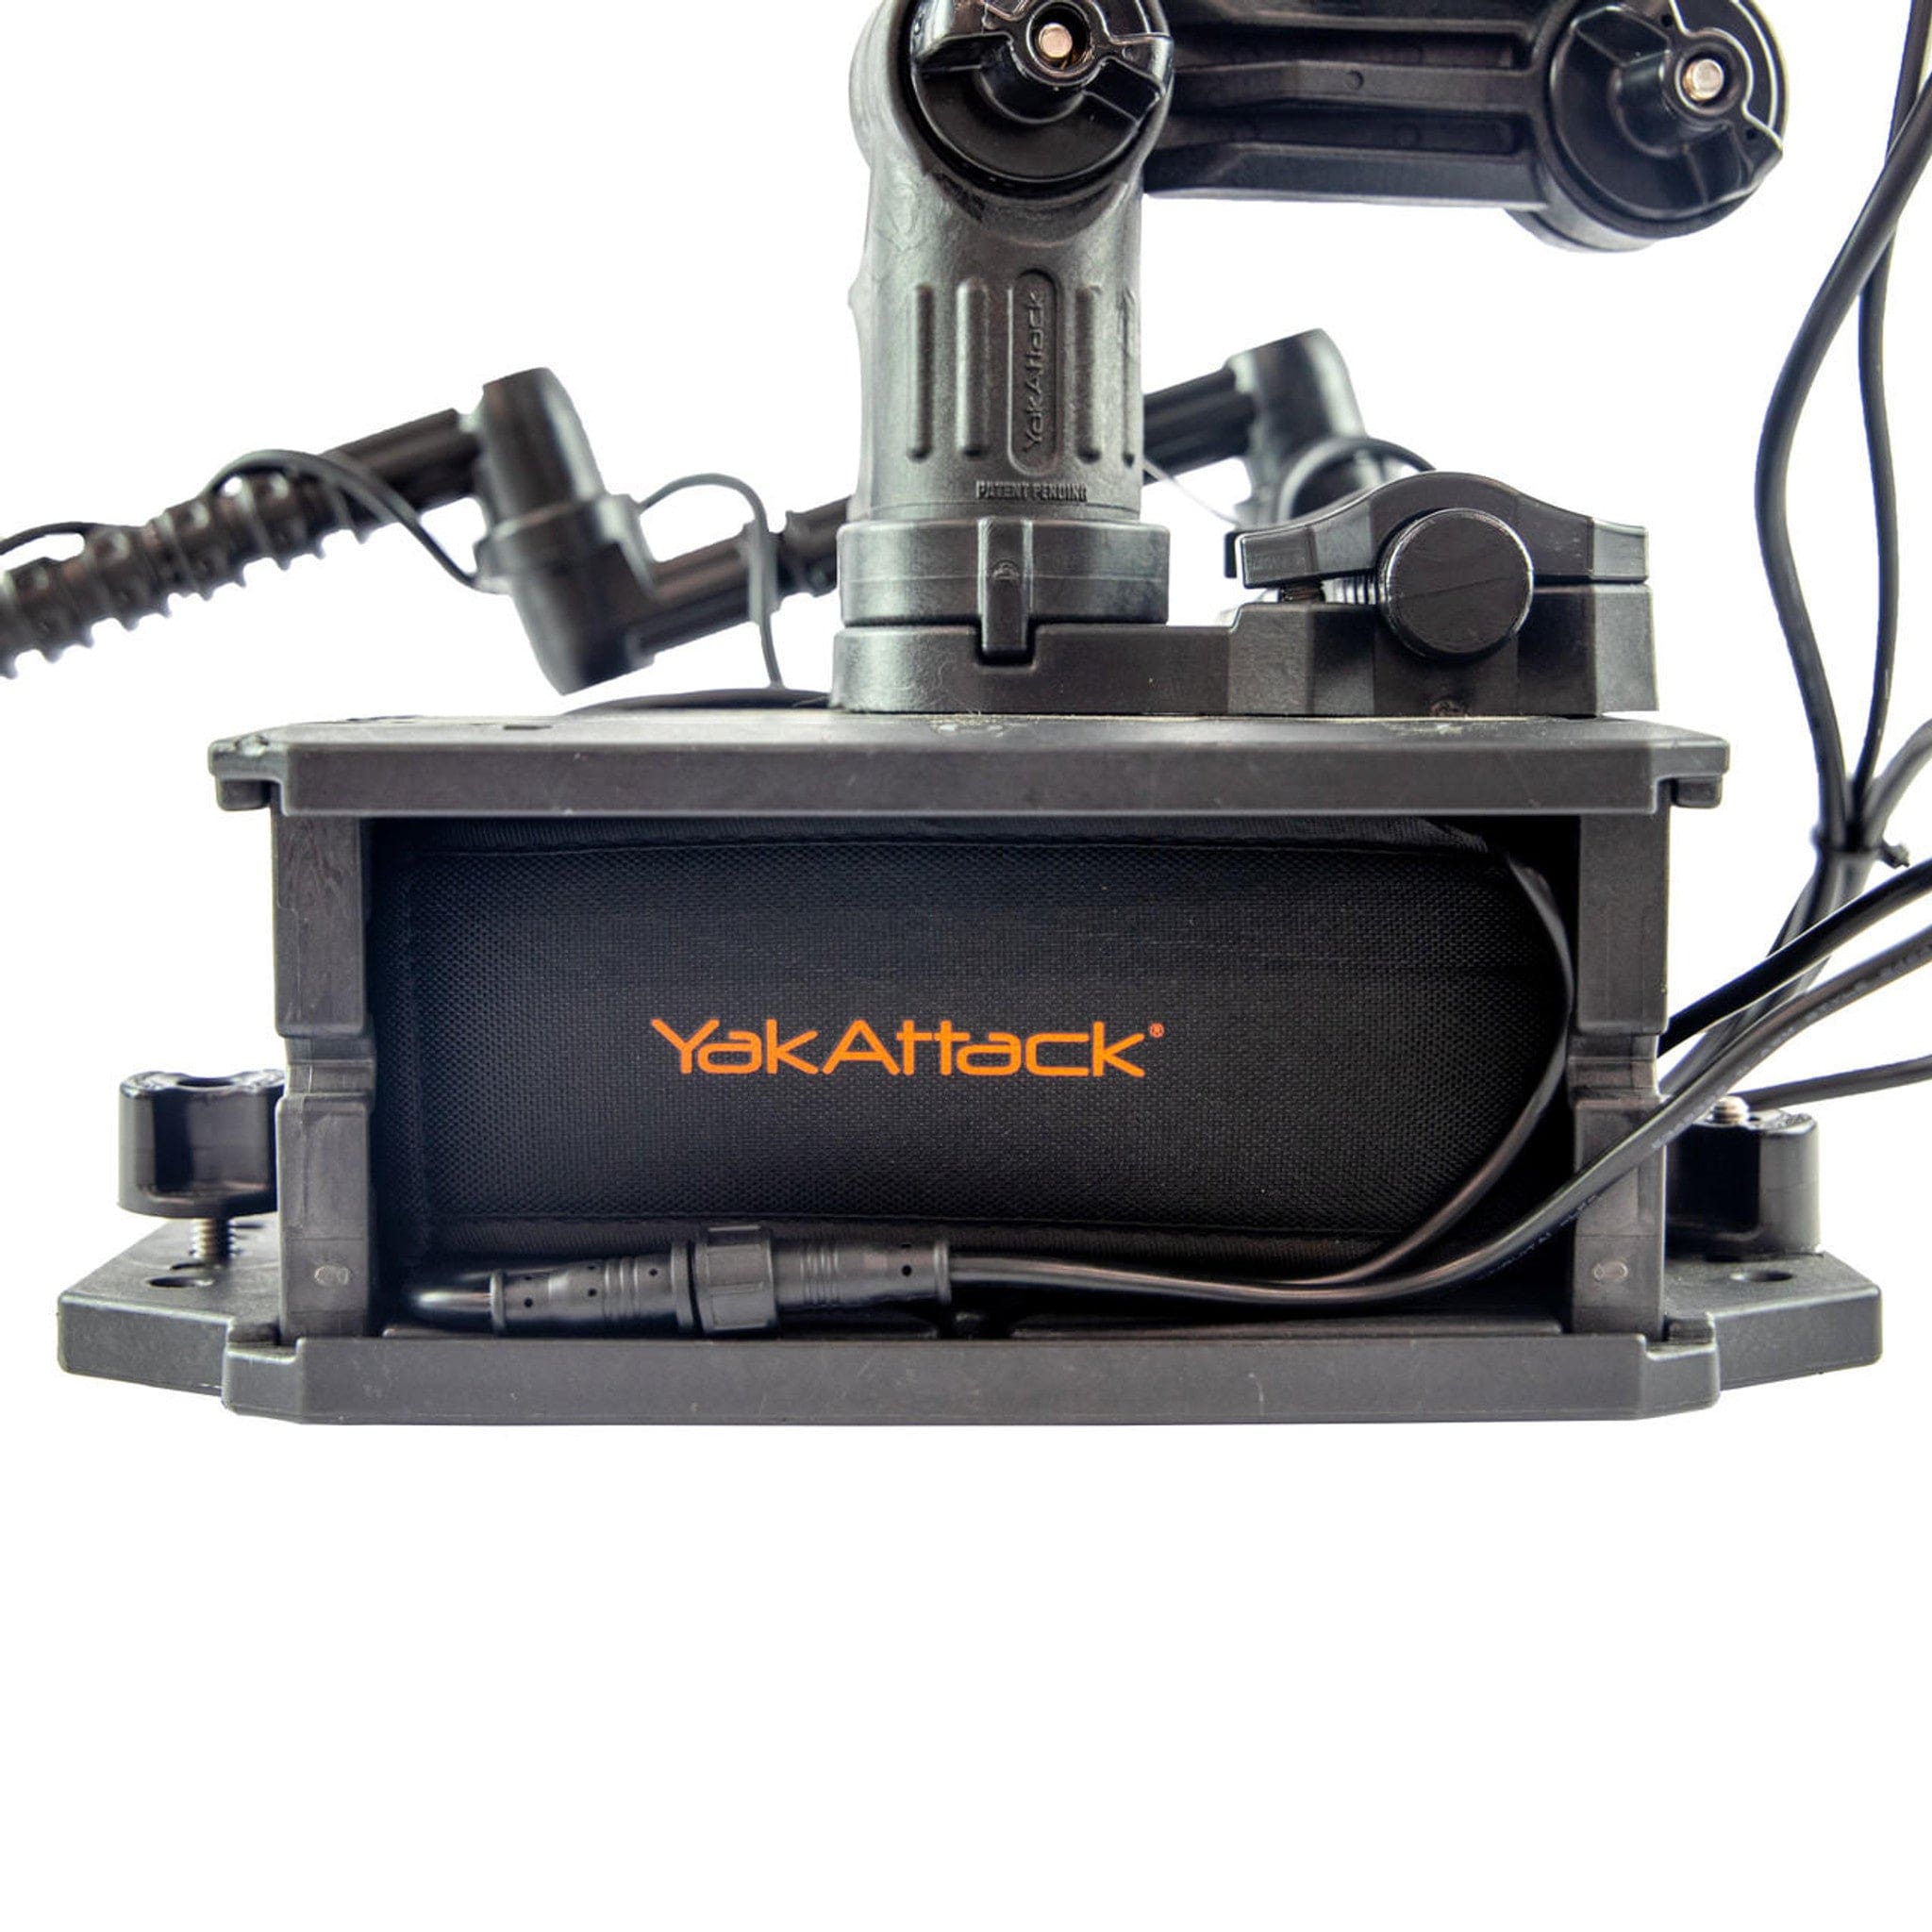 YakAttack 20Ah Lithium-Ion Battery Power Kit with Charger